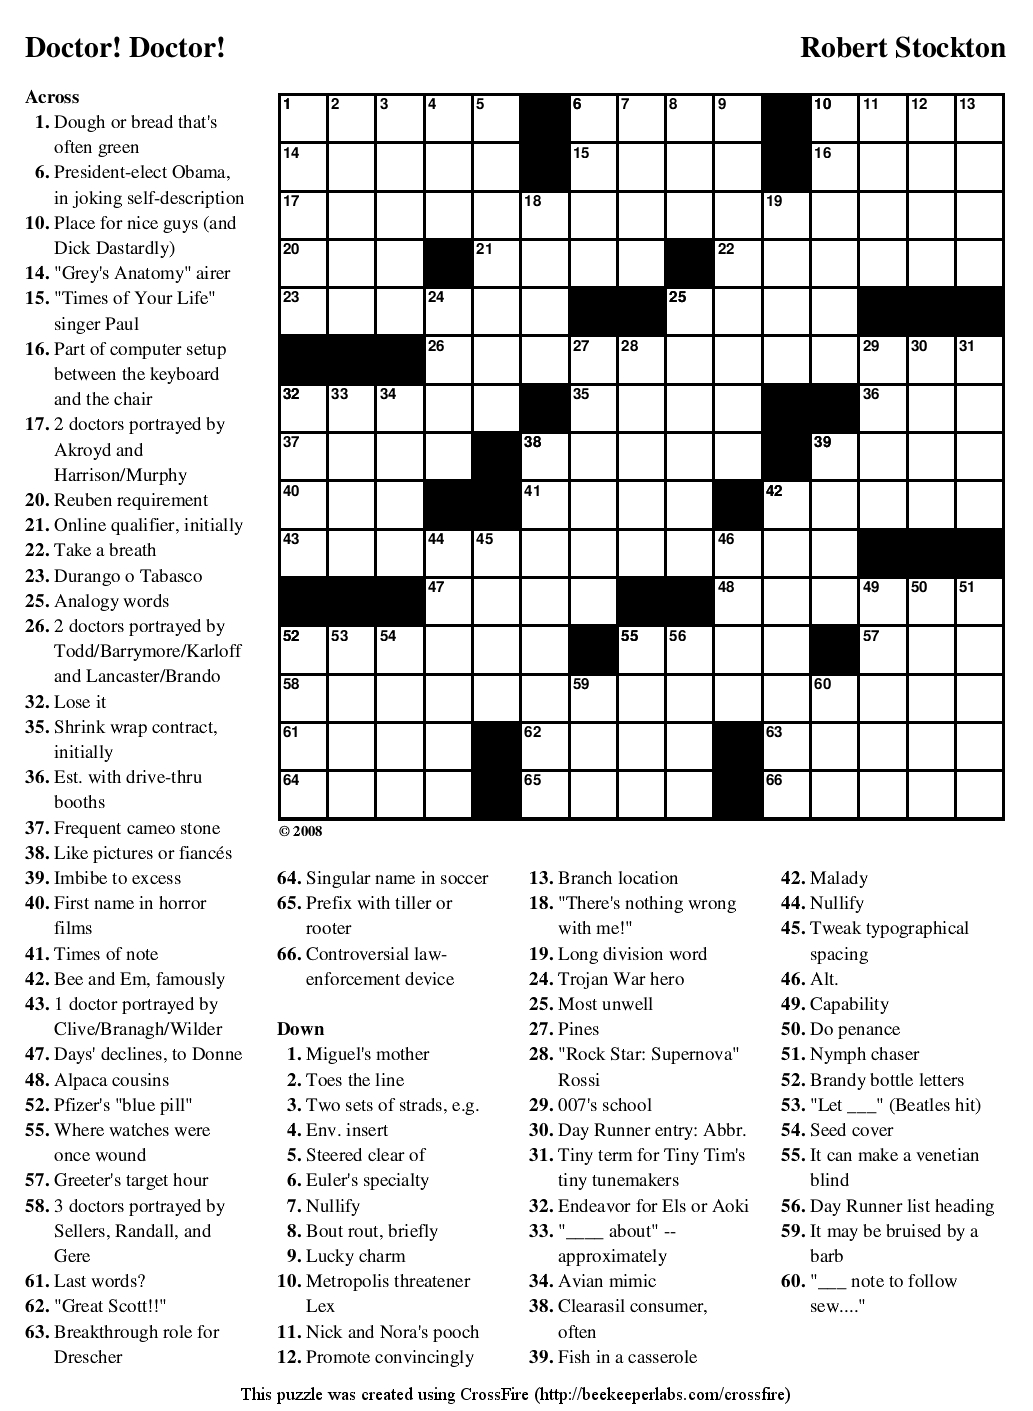 Crossword Puzzles Printable - Yahoo Image Search Results | Crossword - Printable Crossword Puzzles In Spanish